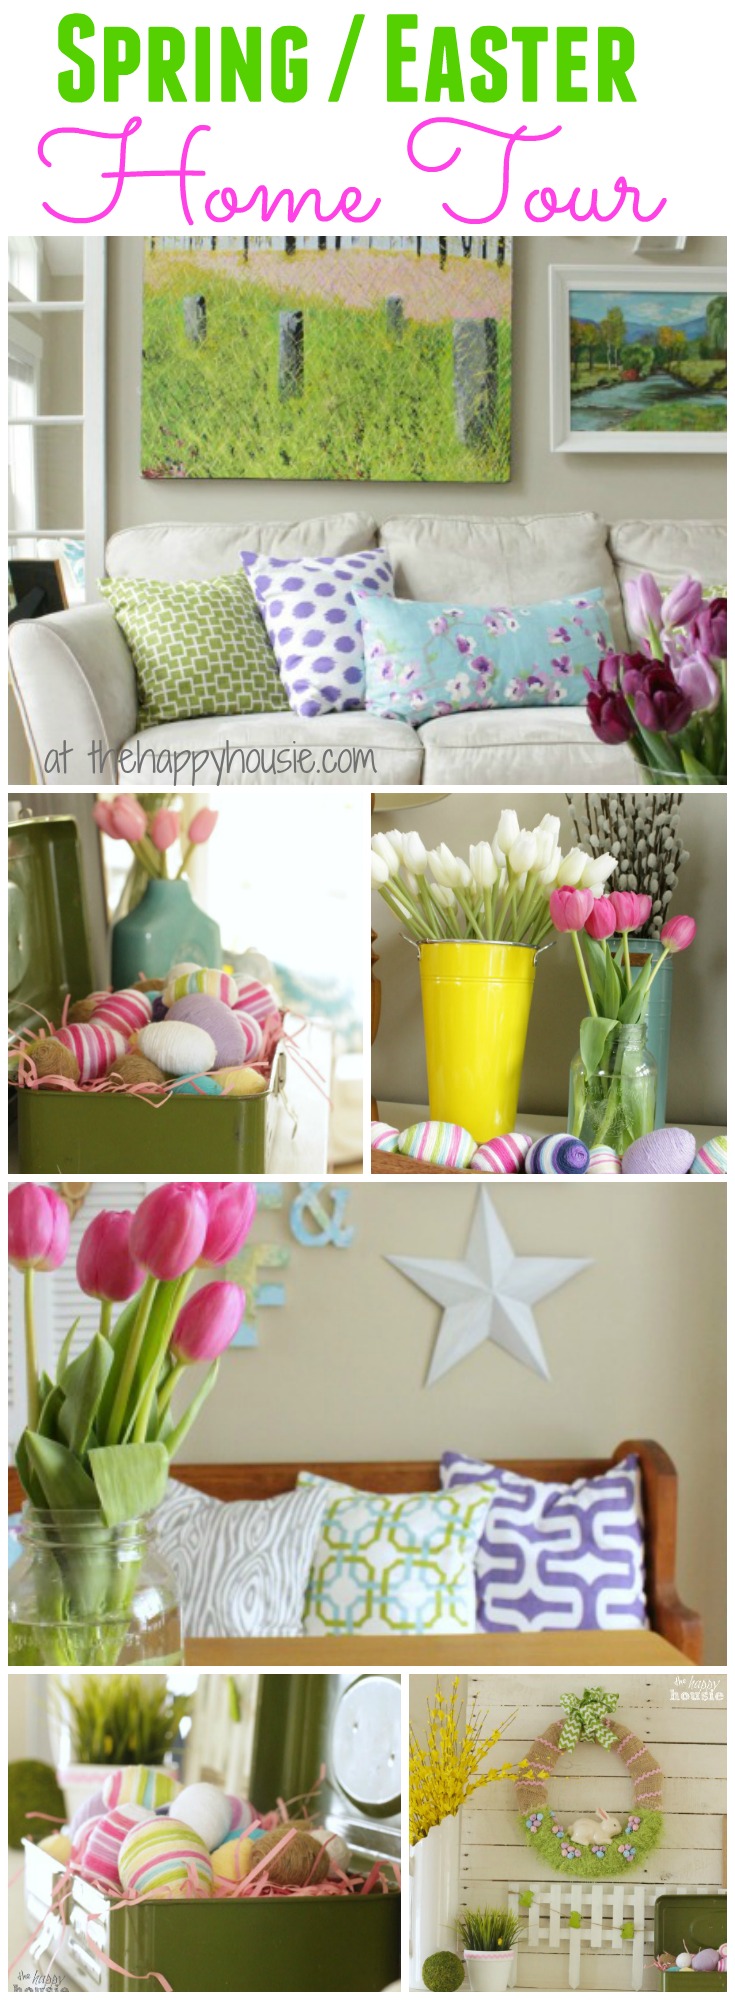 Spring and Easter Home Tour at thehappyhousie.com